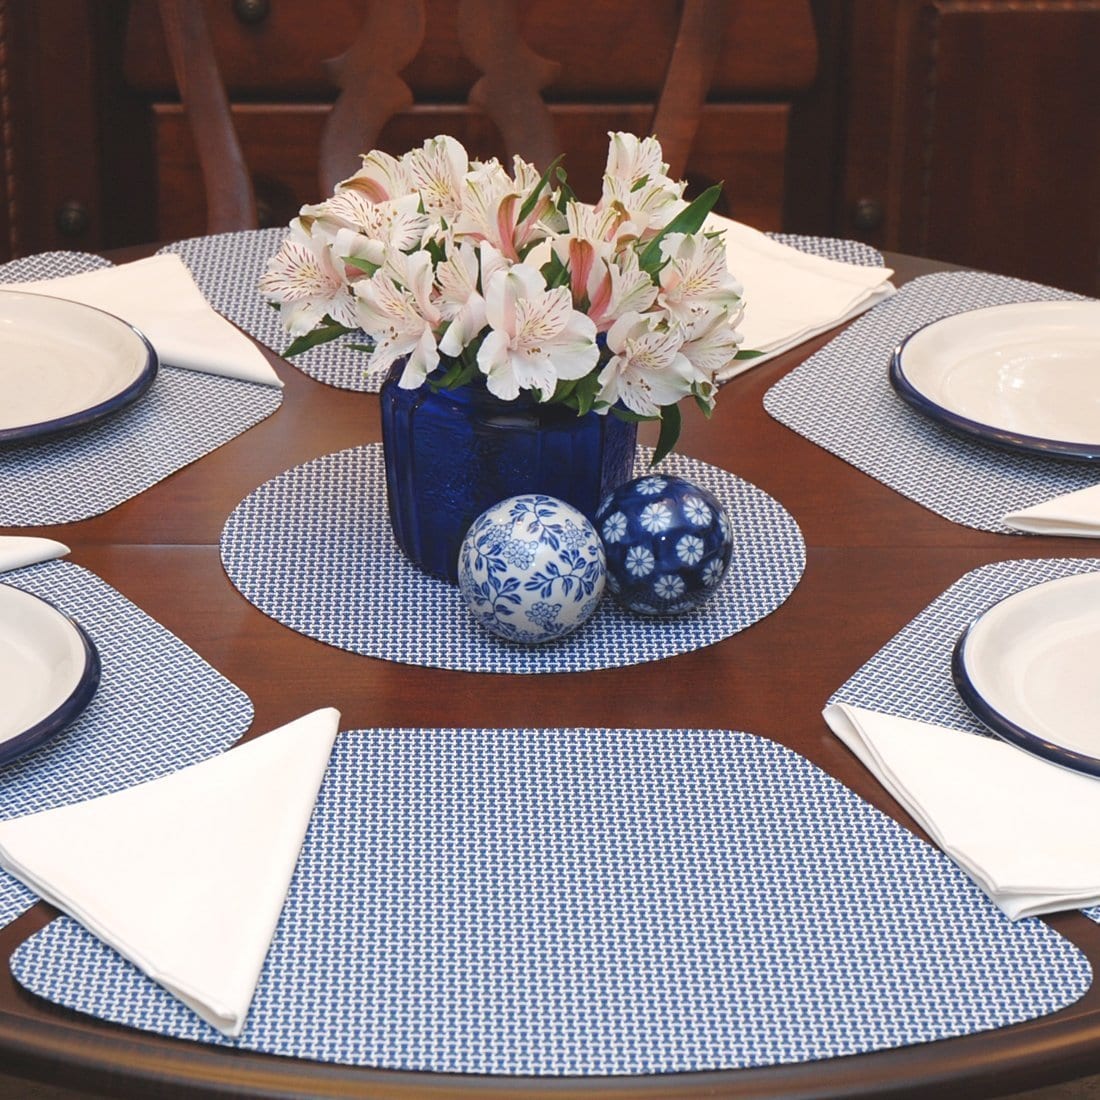 Sweet Pea Linens - Blue/White Wipe Clean Wedge-Shaped Placemats - Set of Four plus Center Round-Charger (SKU#: RS5-1006-F18) - Table Setting